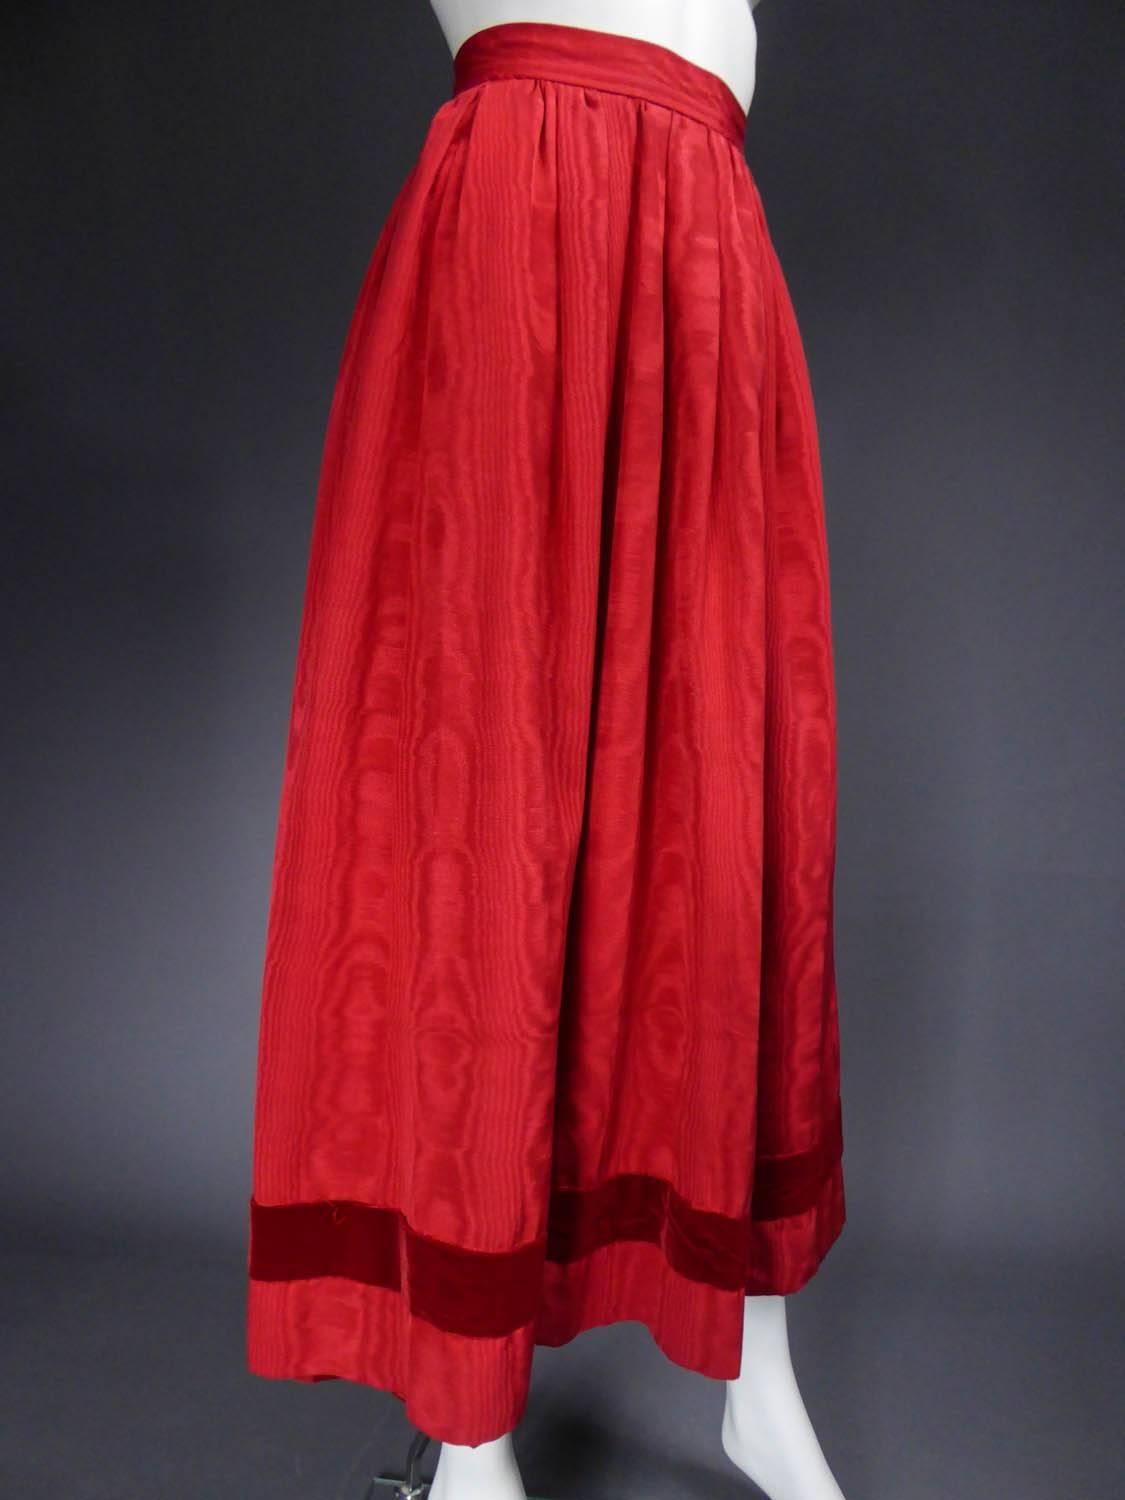 Red Yves Saint Laurent skirt Ballets Russes collection - Circa 1978